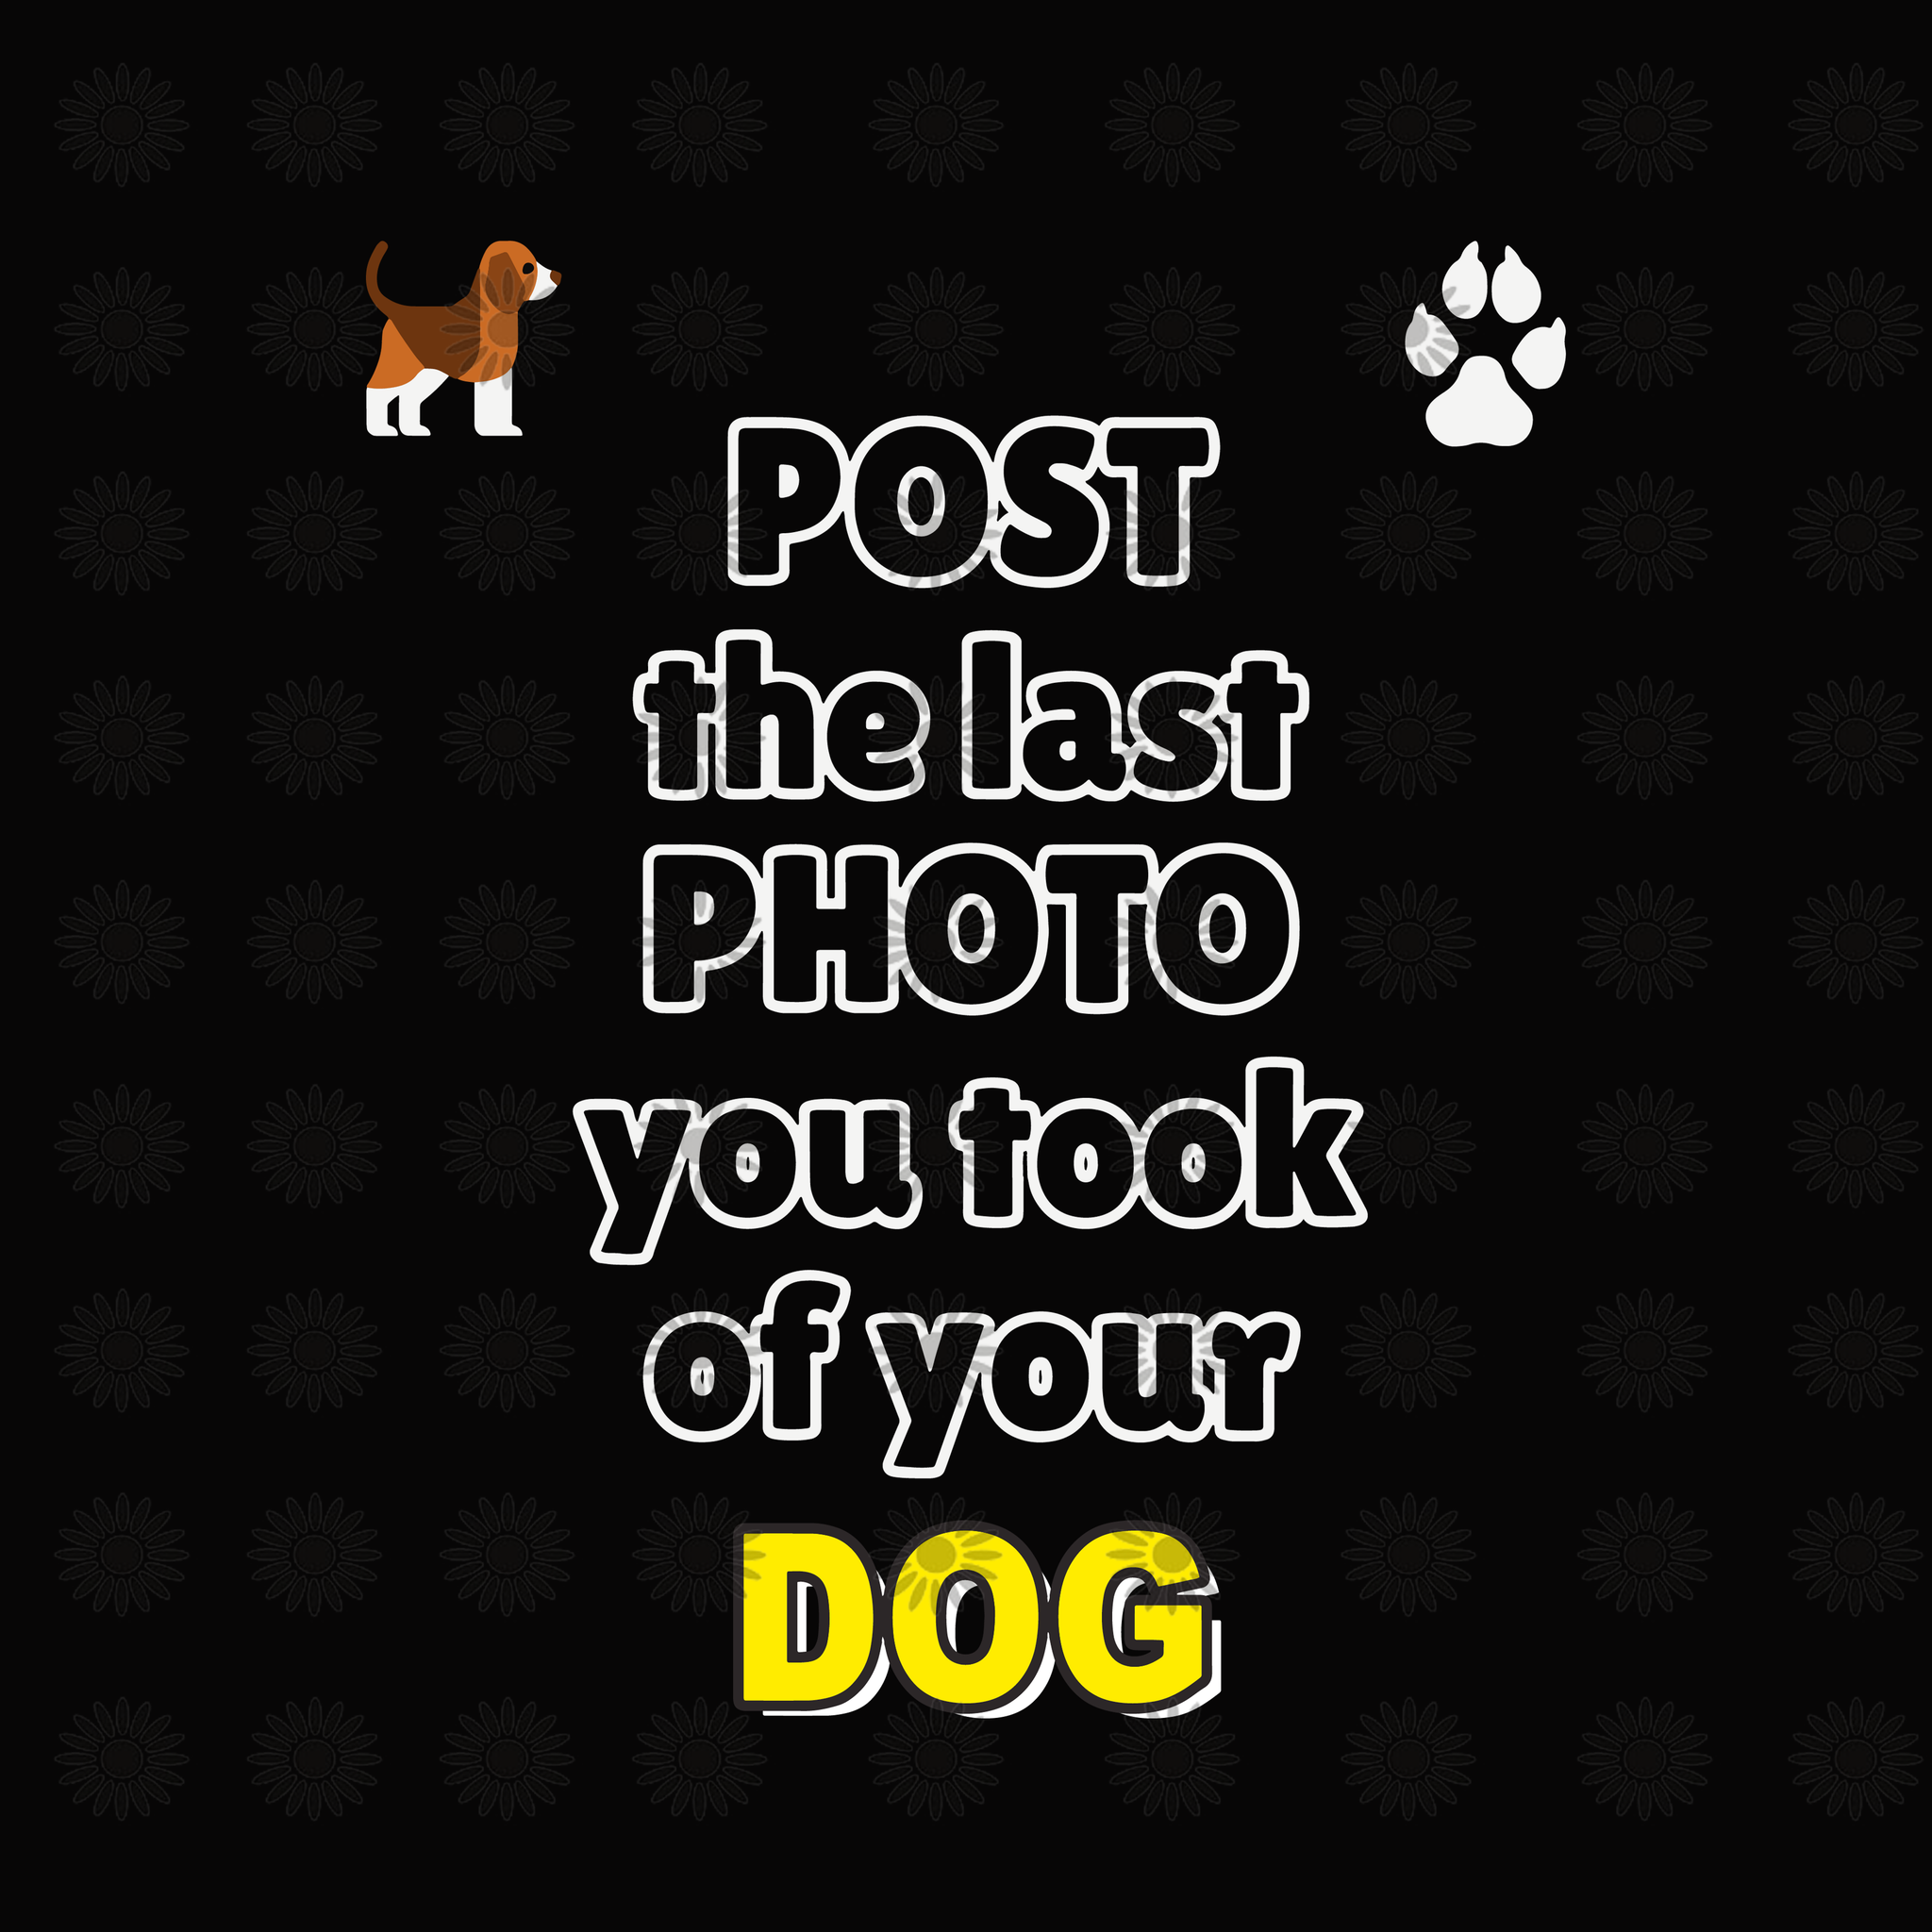 Post the last photo you took of your dog svg, Post the last photo you took of your dog, dog svg,funny quotes svg, png, eps, dxf file